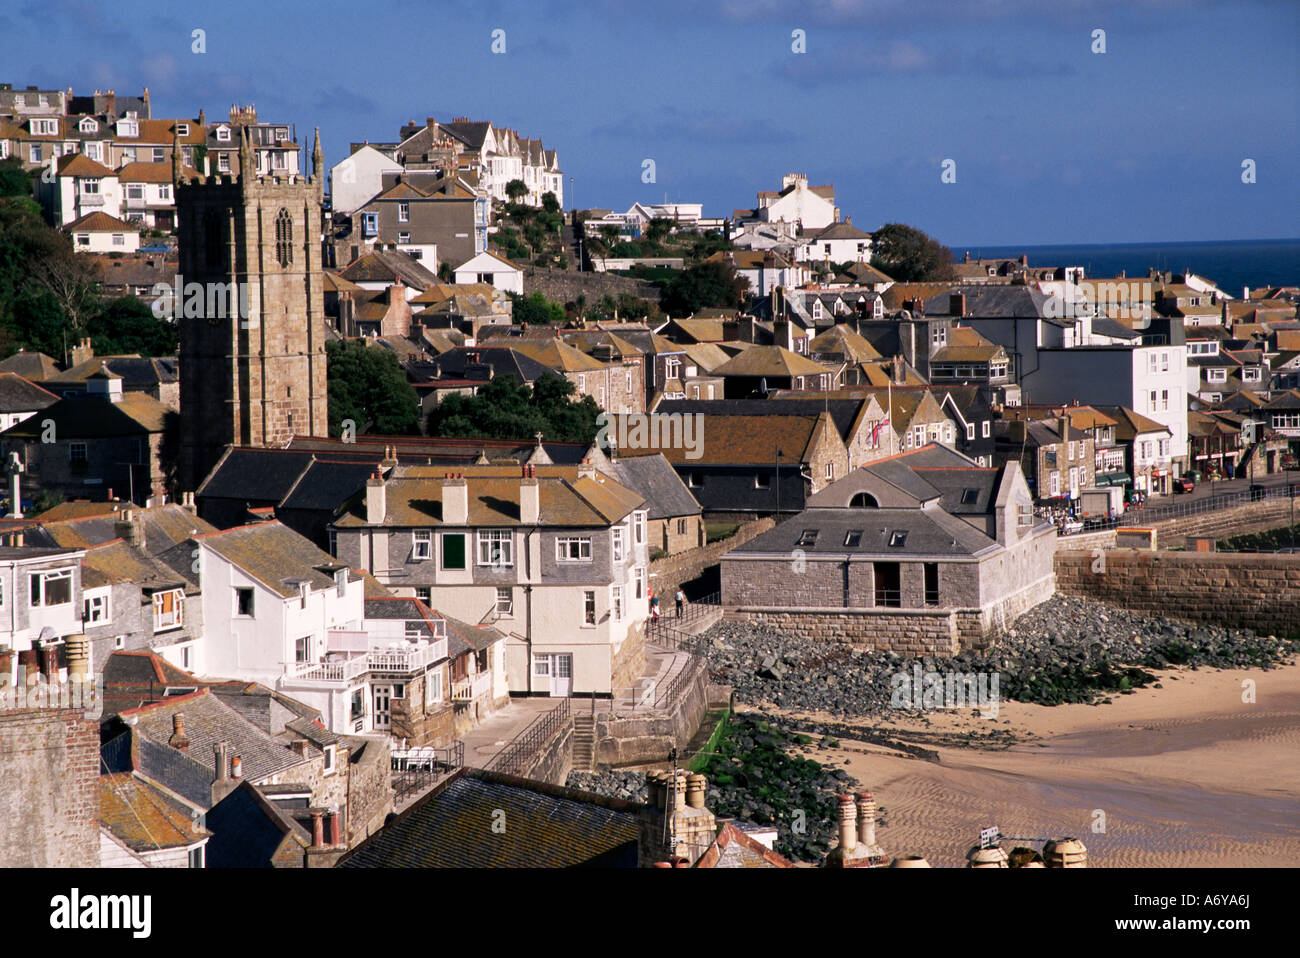 Vew du Malakoff St Ives Cornwall England United Kingdom Europe Banque D'Images